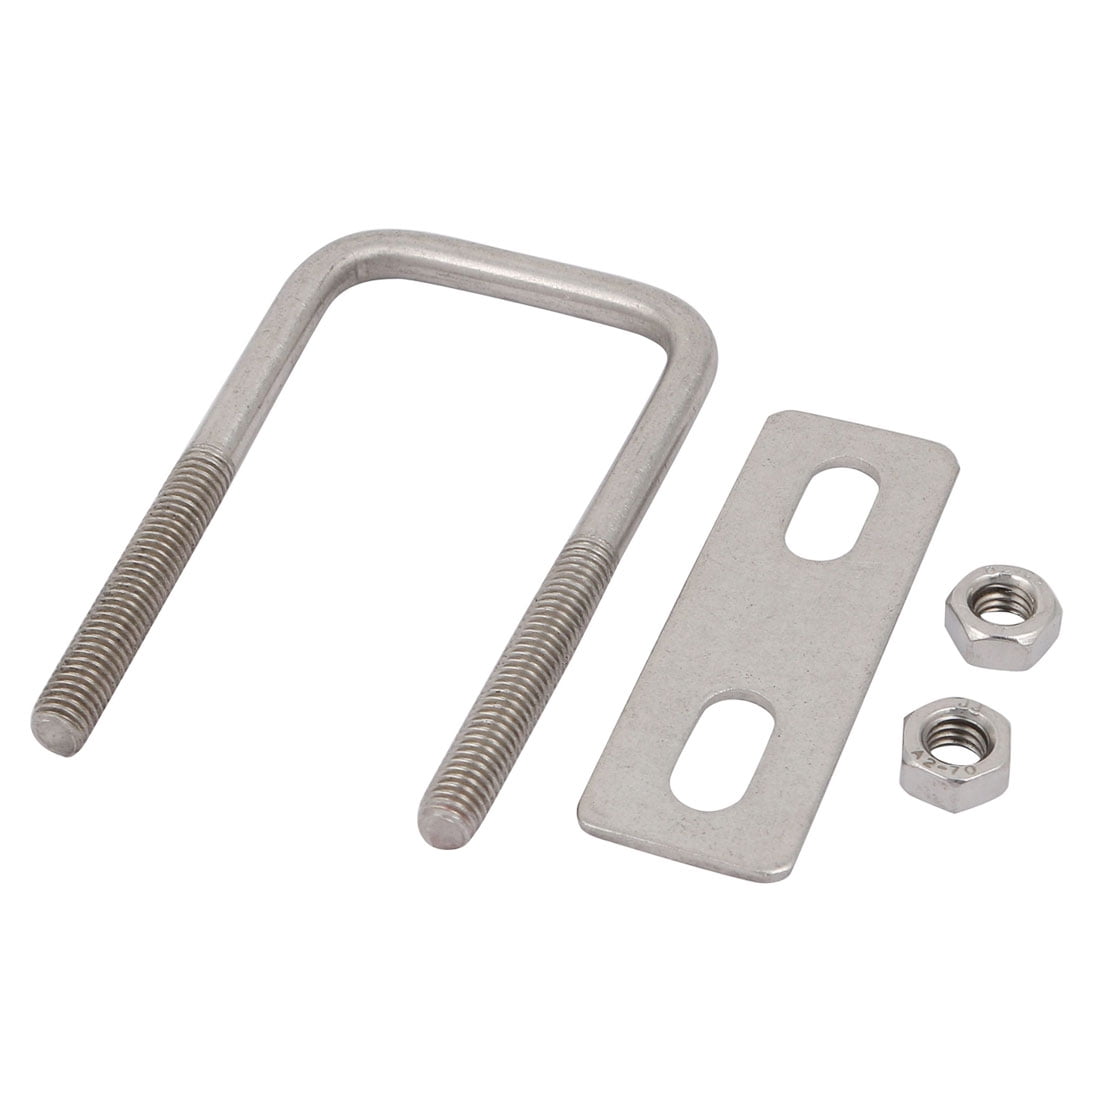 Inner Width 304 Stainless Steel M6 w Nuts Frame Straps Automotive Replacement 2Pcs Square U-Bolts Kits 1-3/8 35mm 